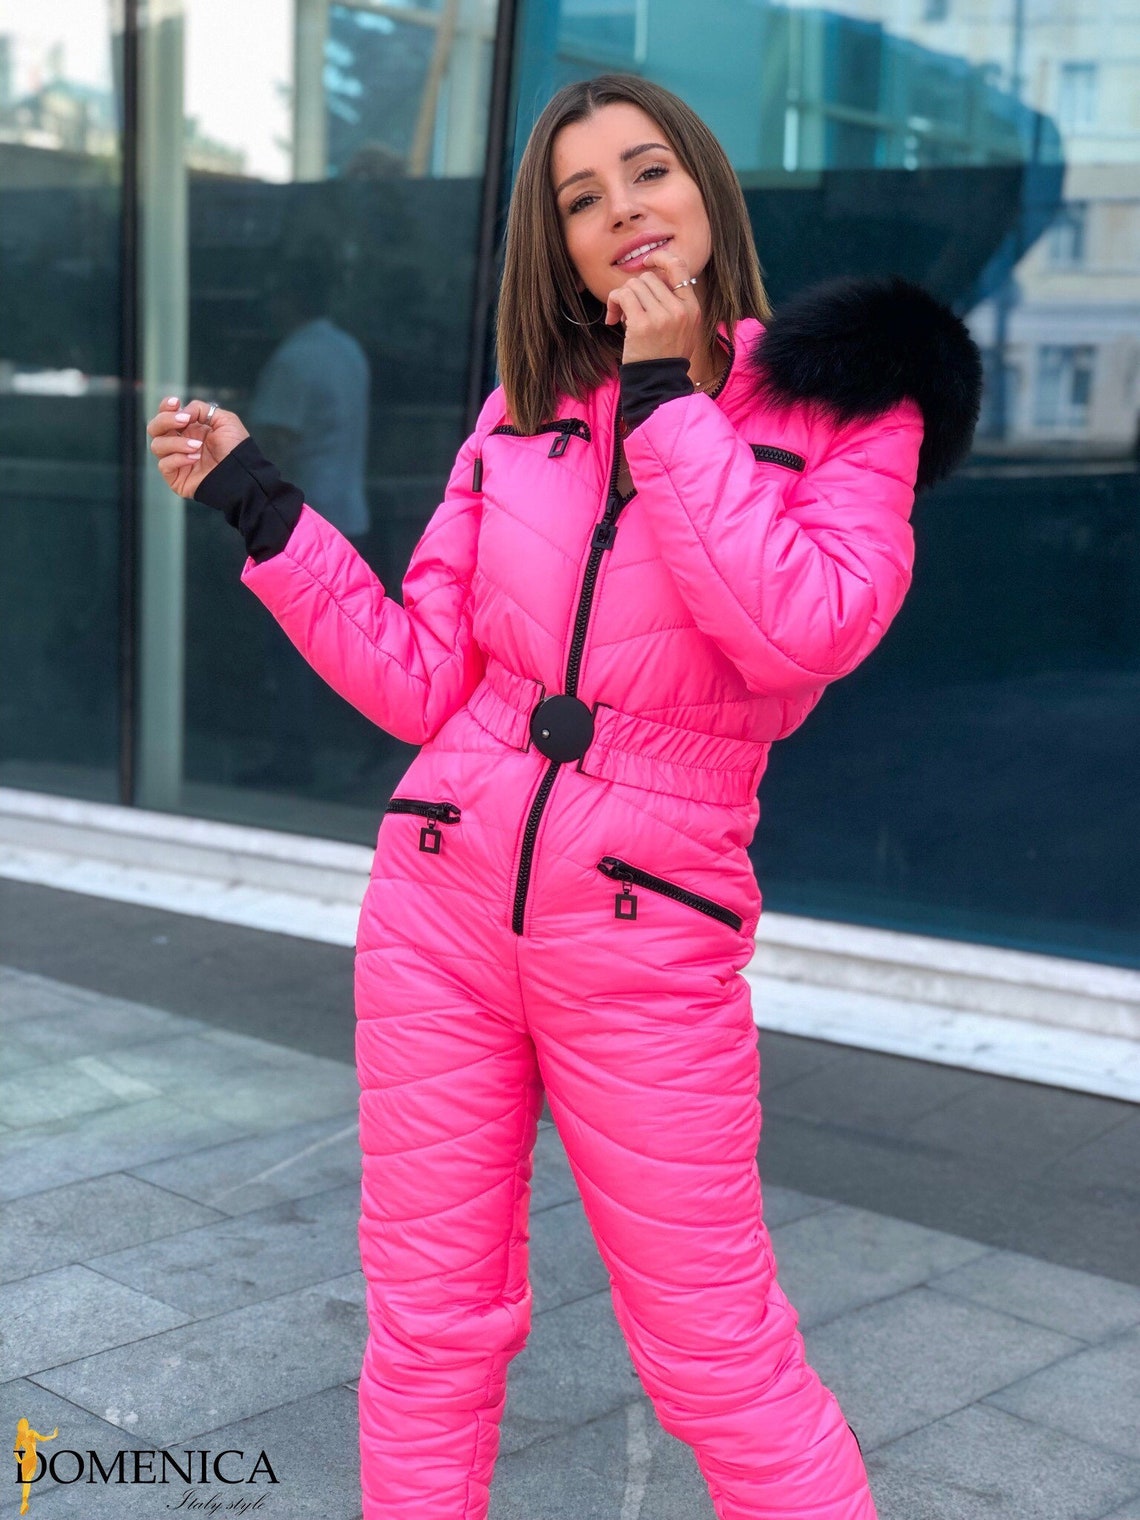 Women Ski Jumpsuit Bright Pink Overall Winter Suit | Etsy